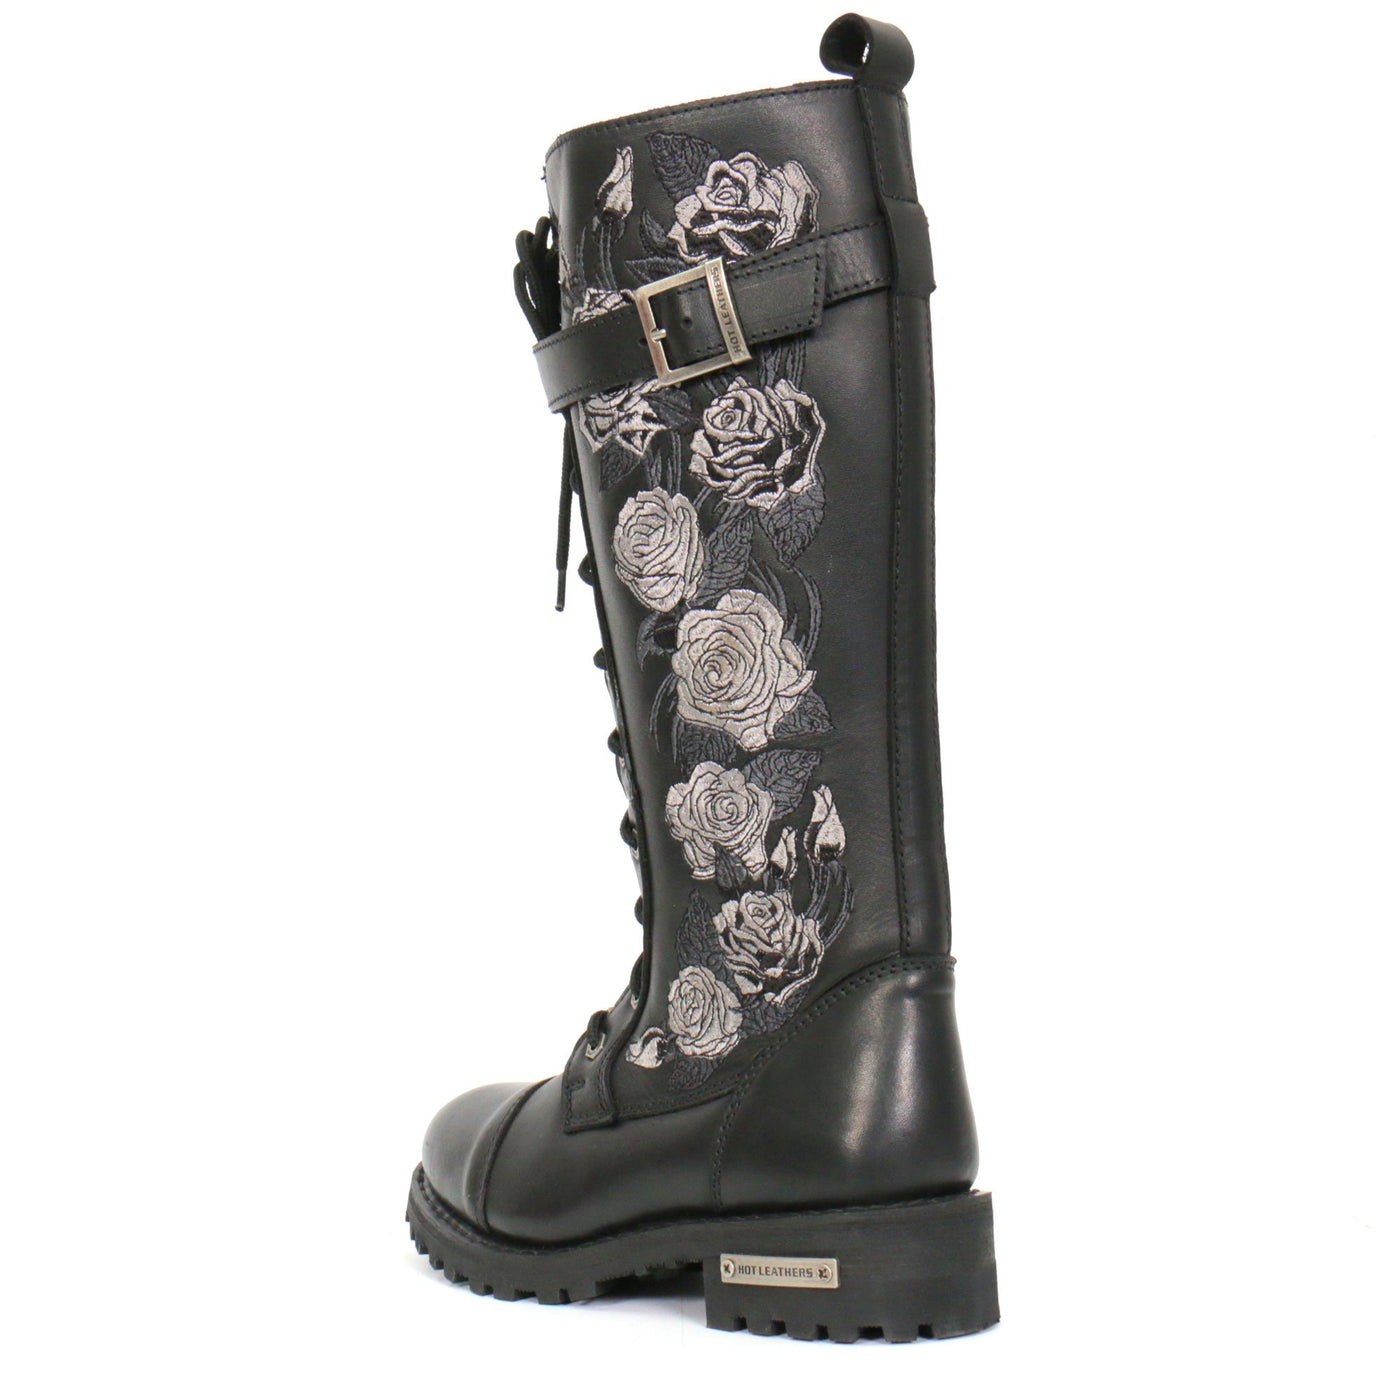 Hot Leathers Women's Knee High Wild Roses Leather Boots are a women's black boot with a wild roses design, made of top grain leather.